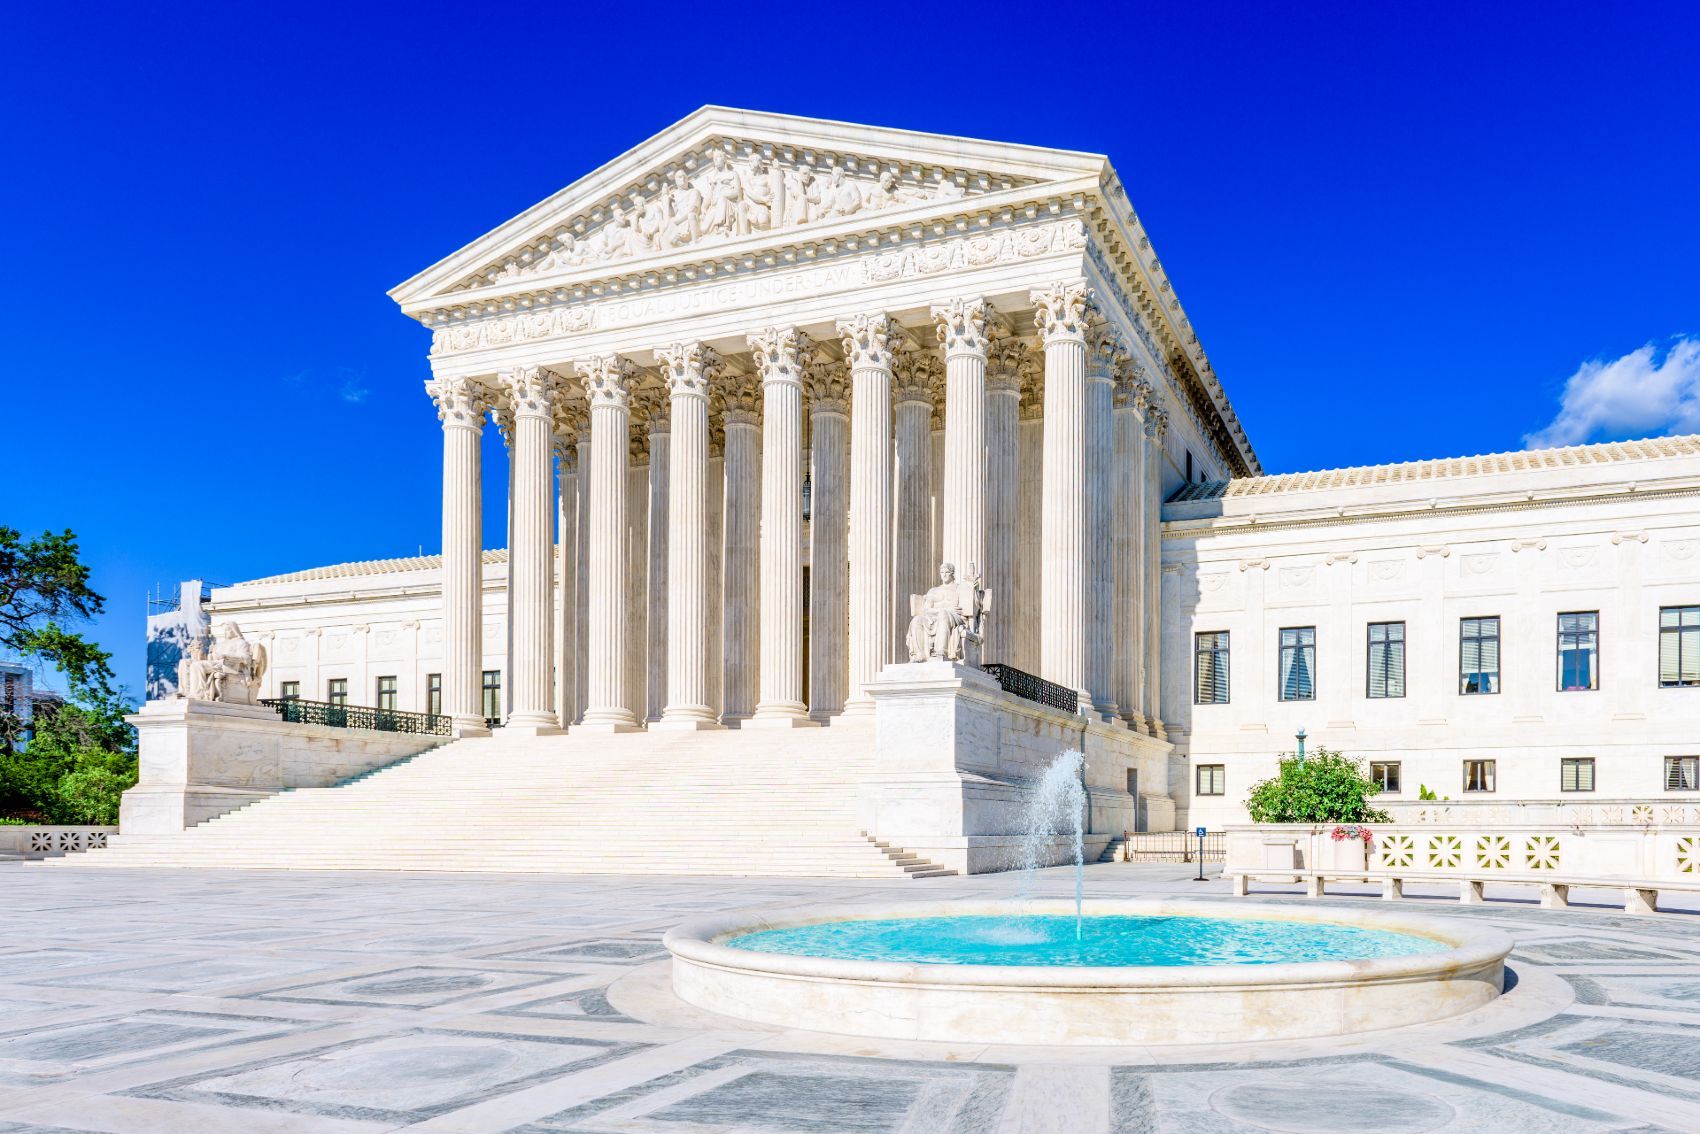 The US Supreme Court building - Affordable Care Act